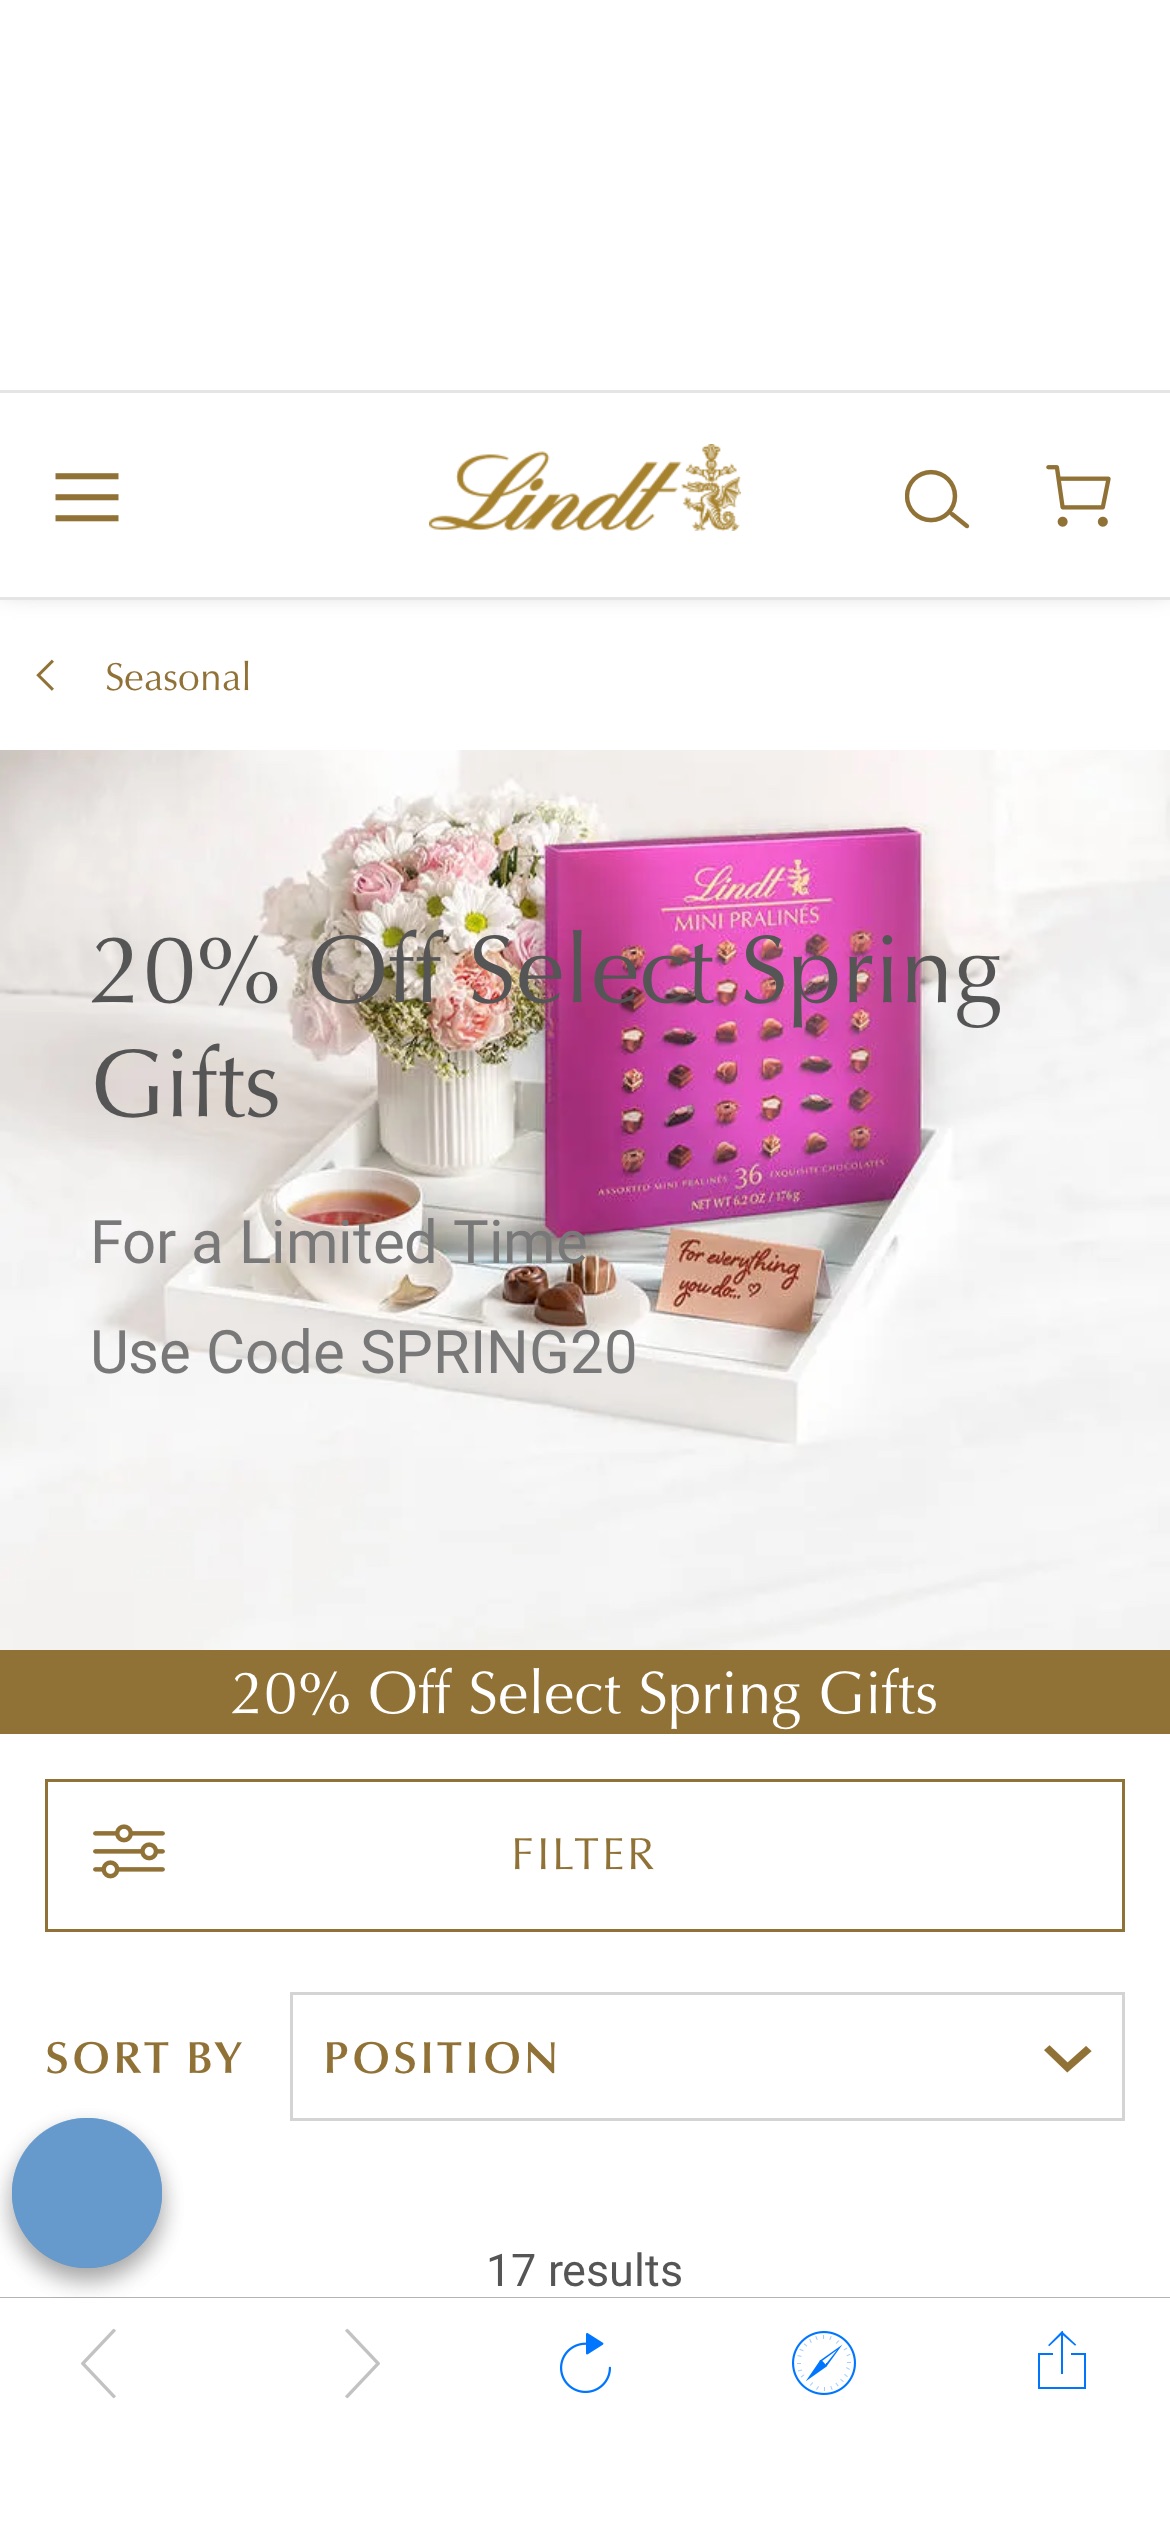 20% Off Select Spring Gifts